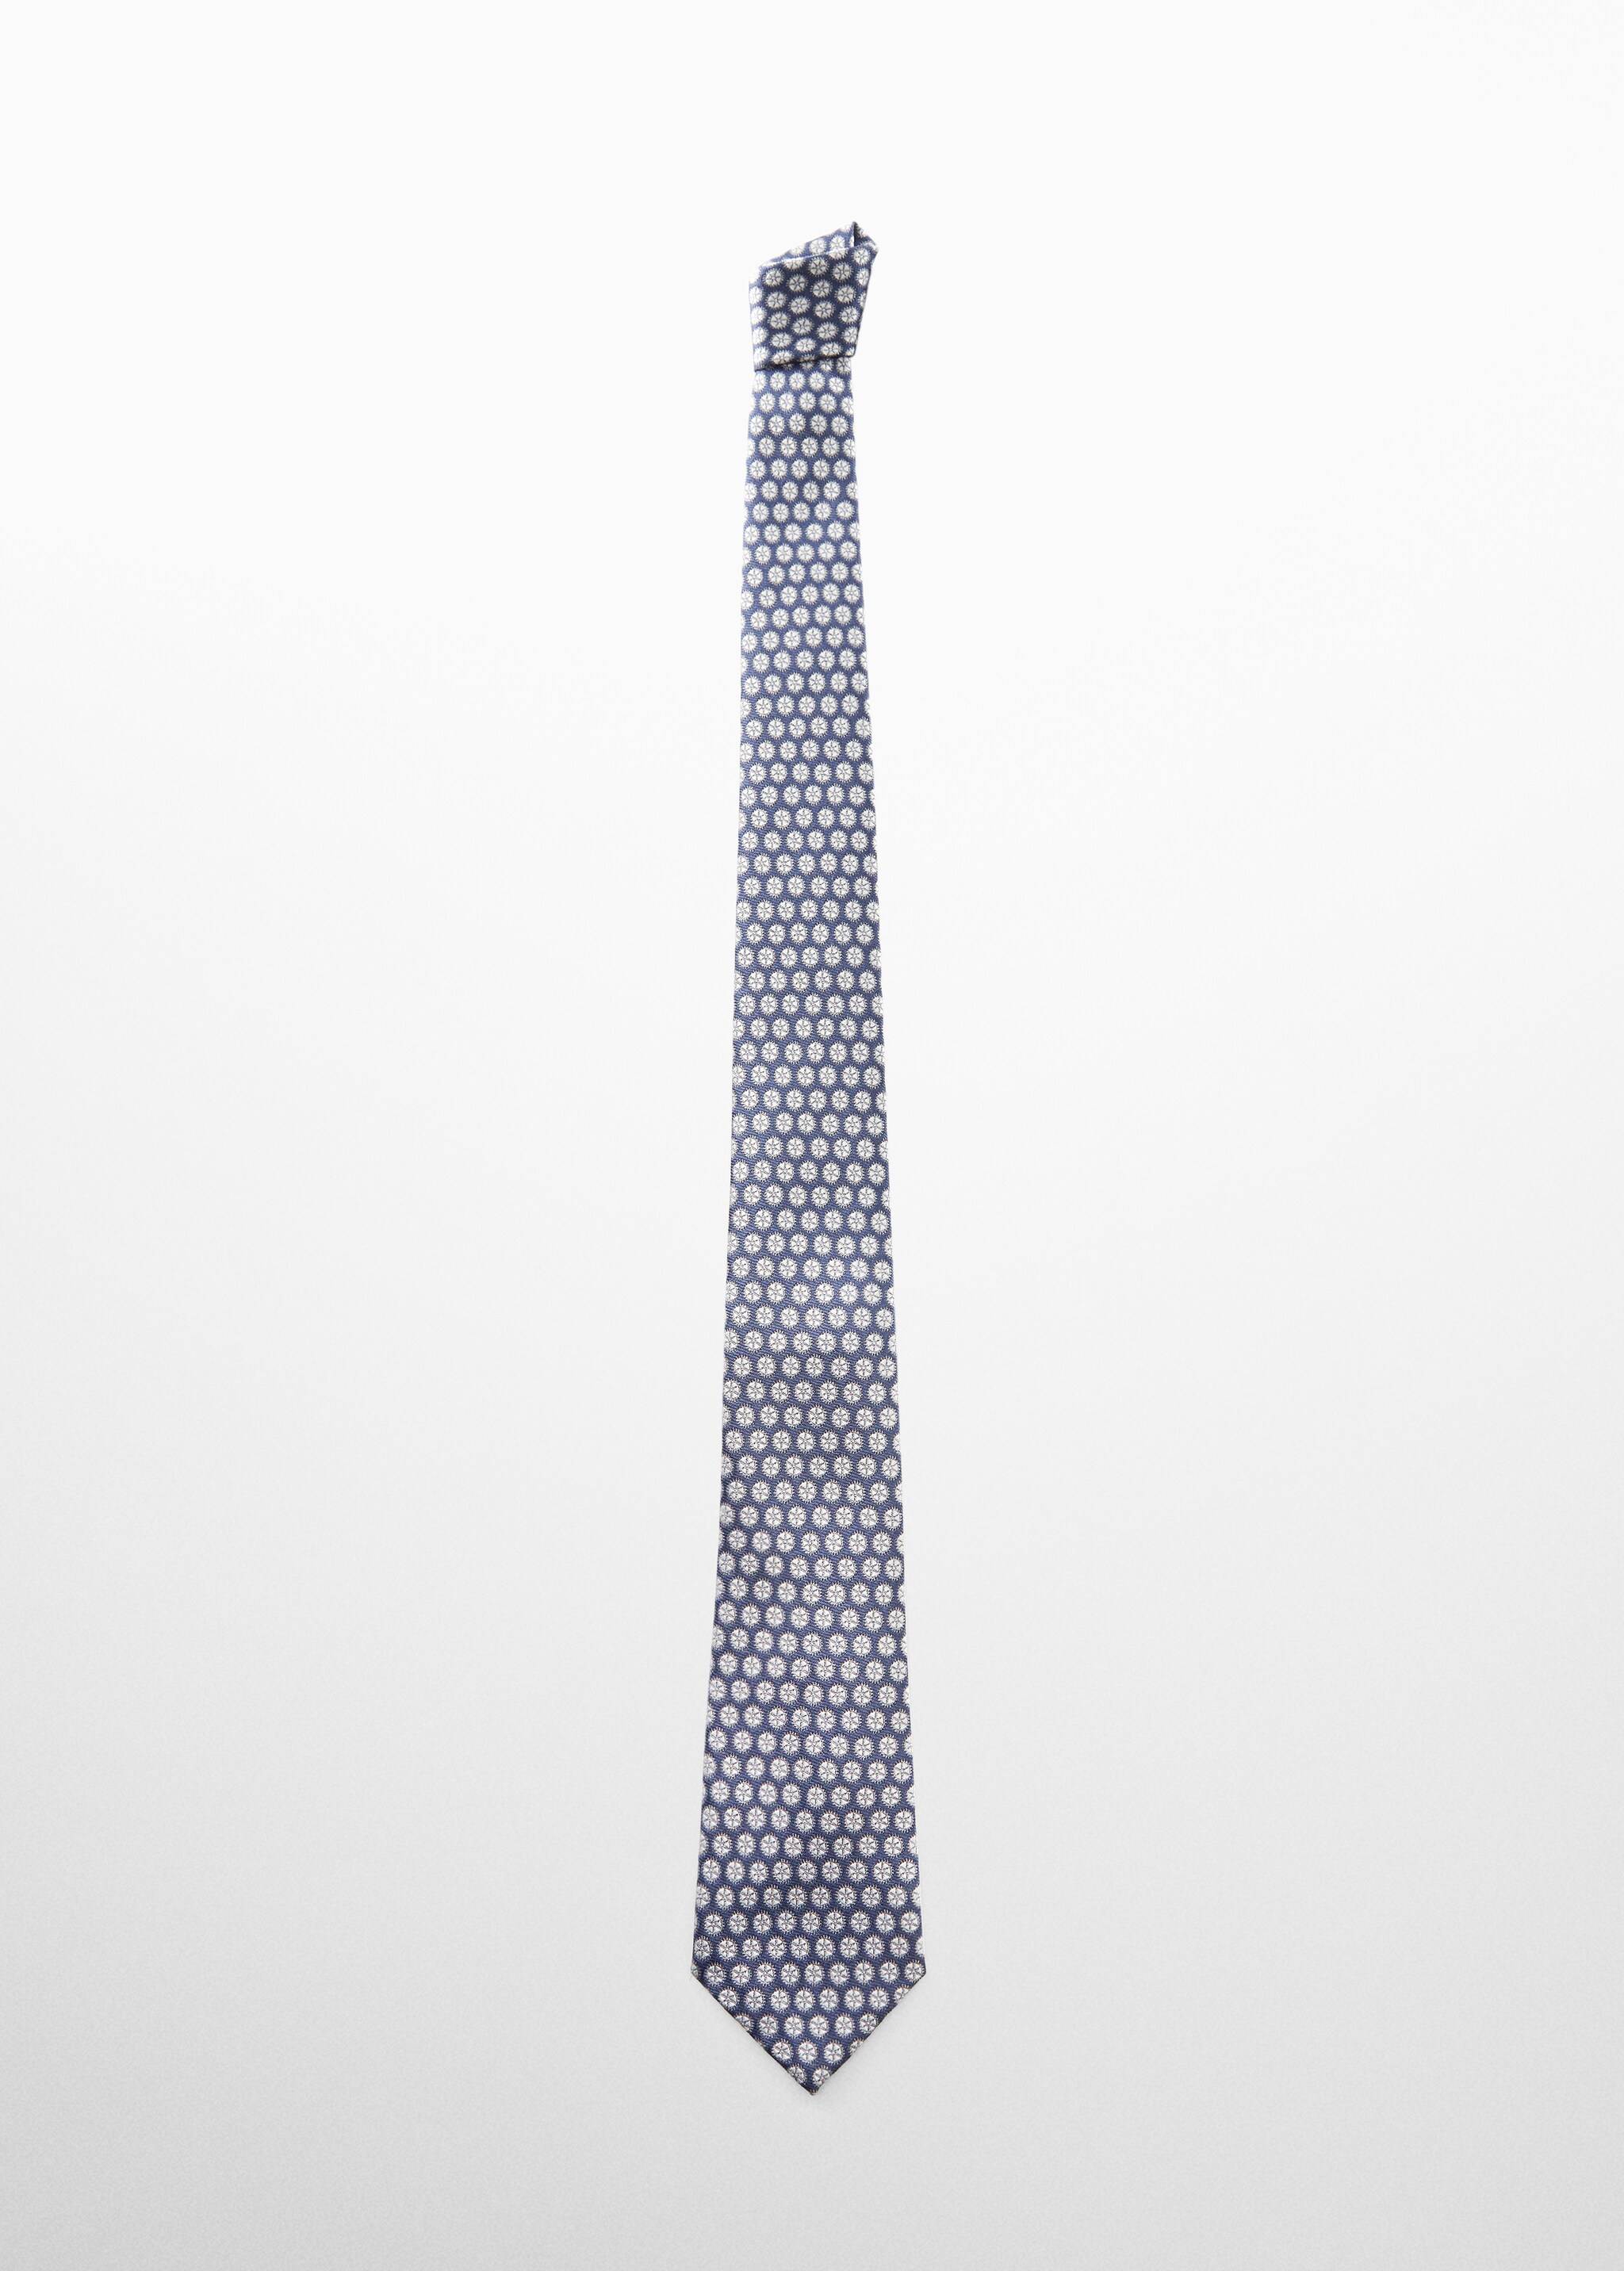 Geometric print tie - Article without model